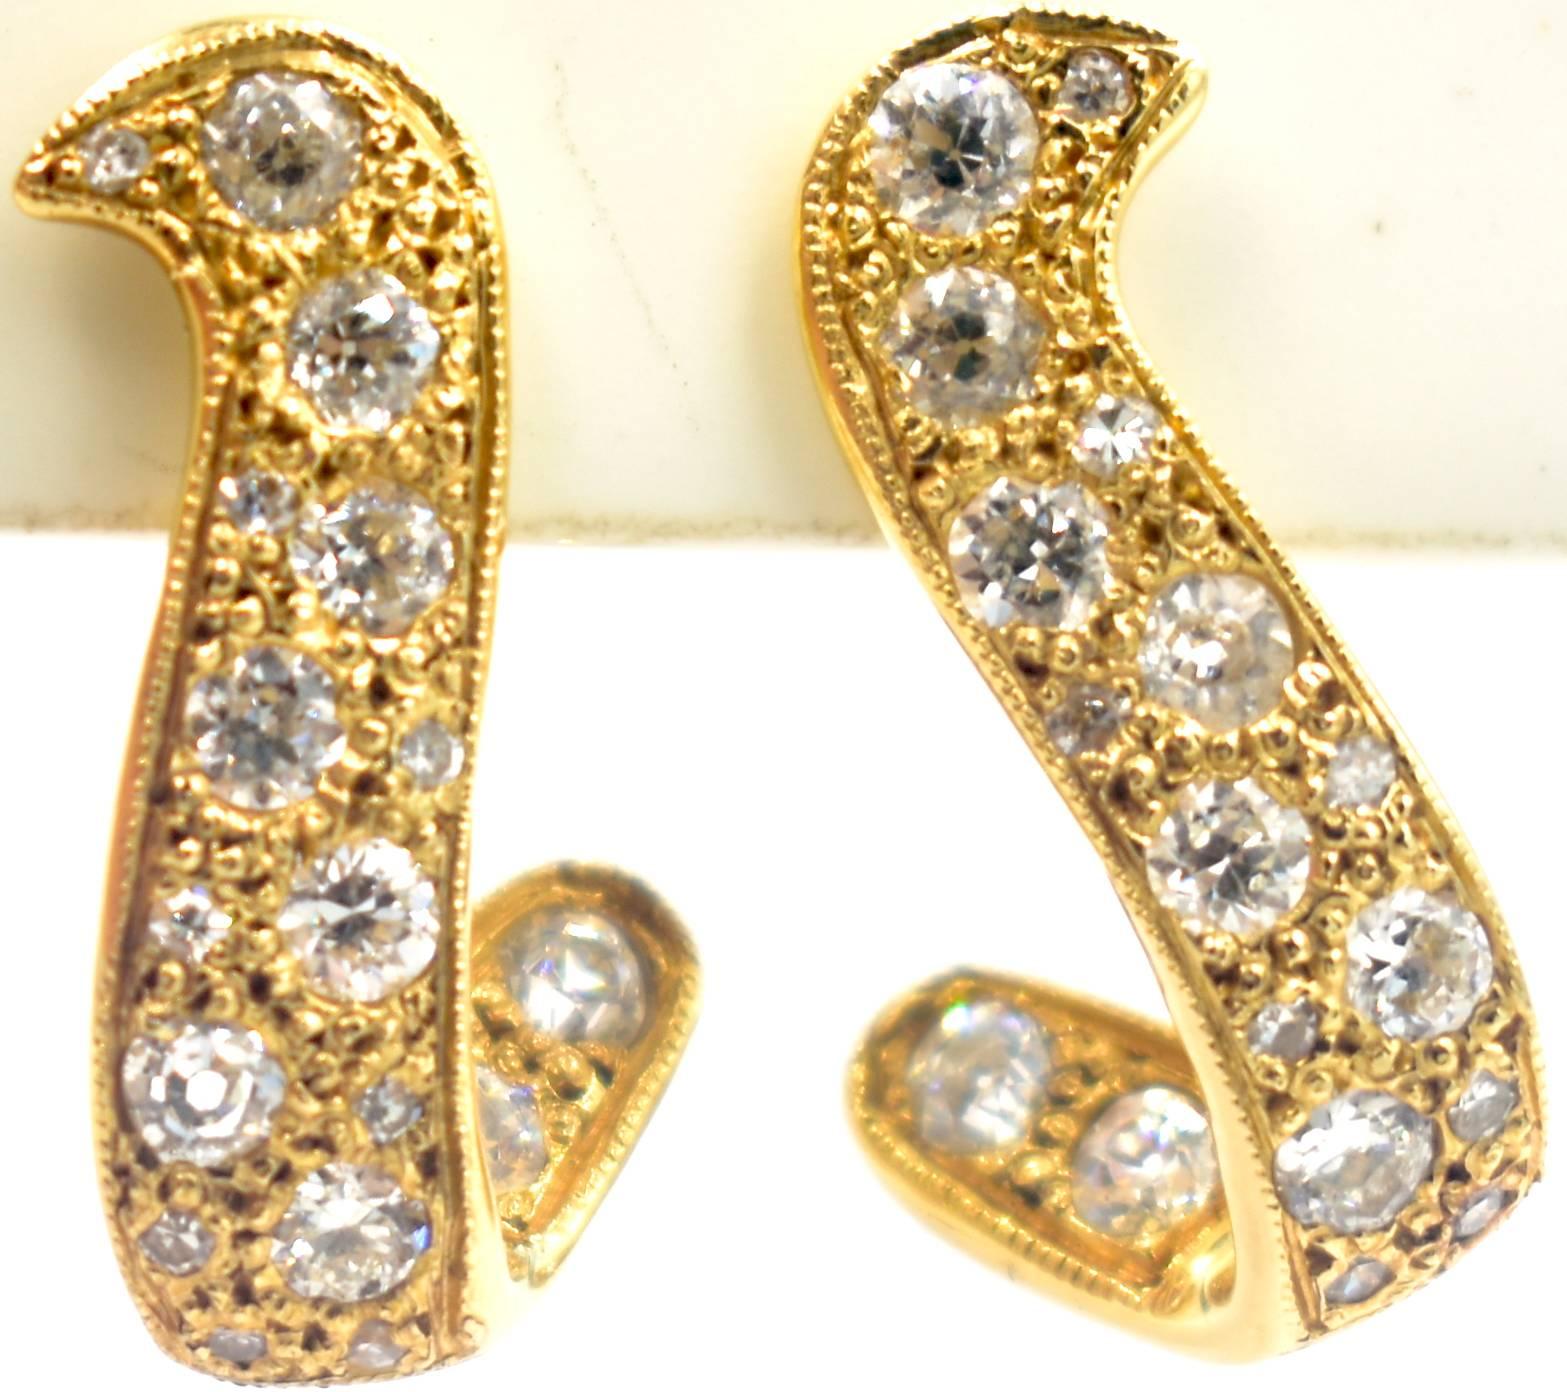 Delightful pair of 14K gold and diamond earrings in a softly swerving shape with screw back fittings. The clear, sparkly diamonds amount to 1.25 cts.
But the weight is not what it's all about.  It's the intricacy of the design and the detail of the